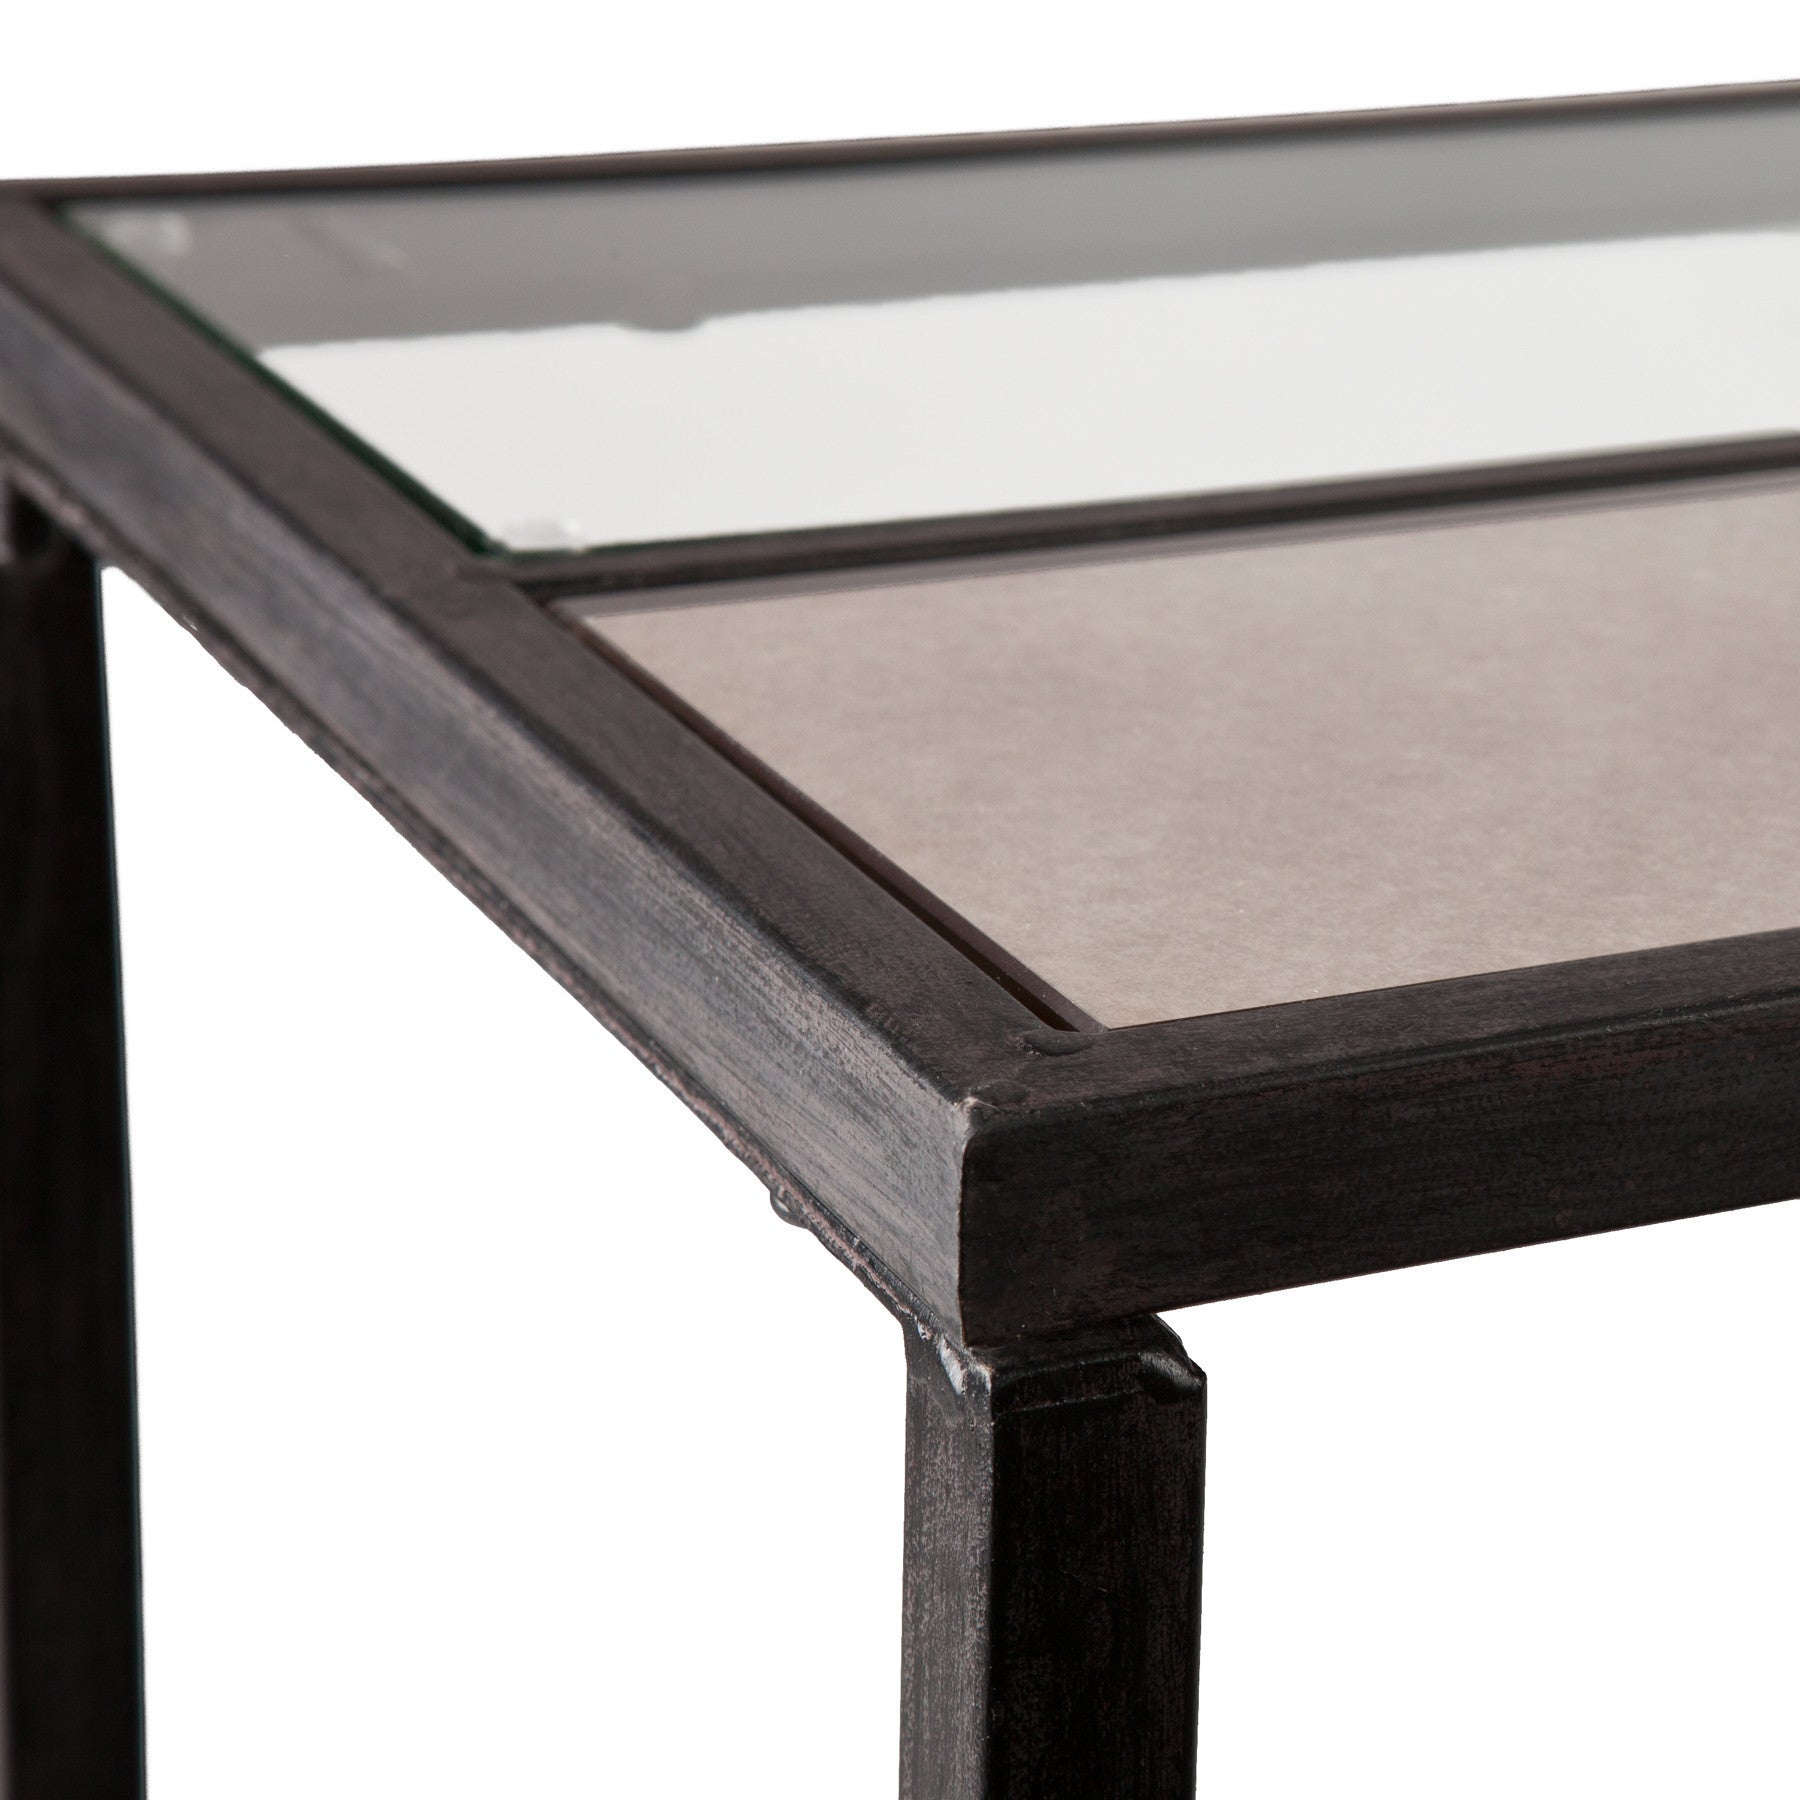 Eamce Console Table